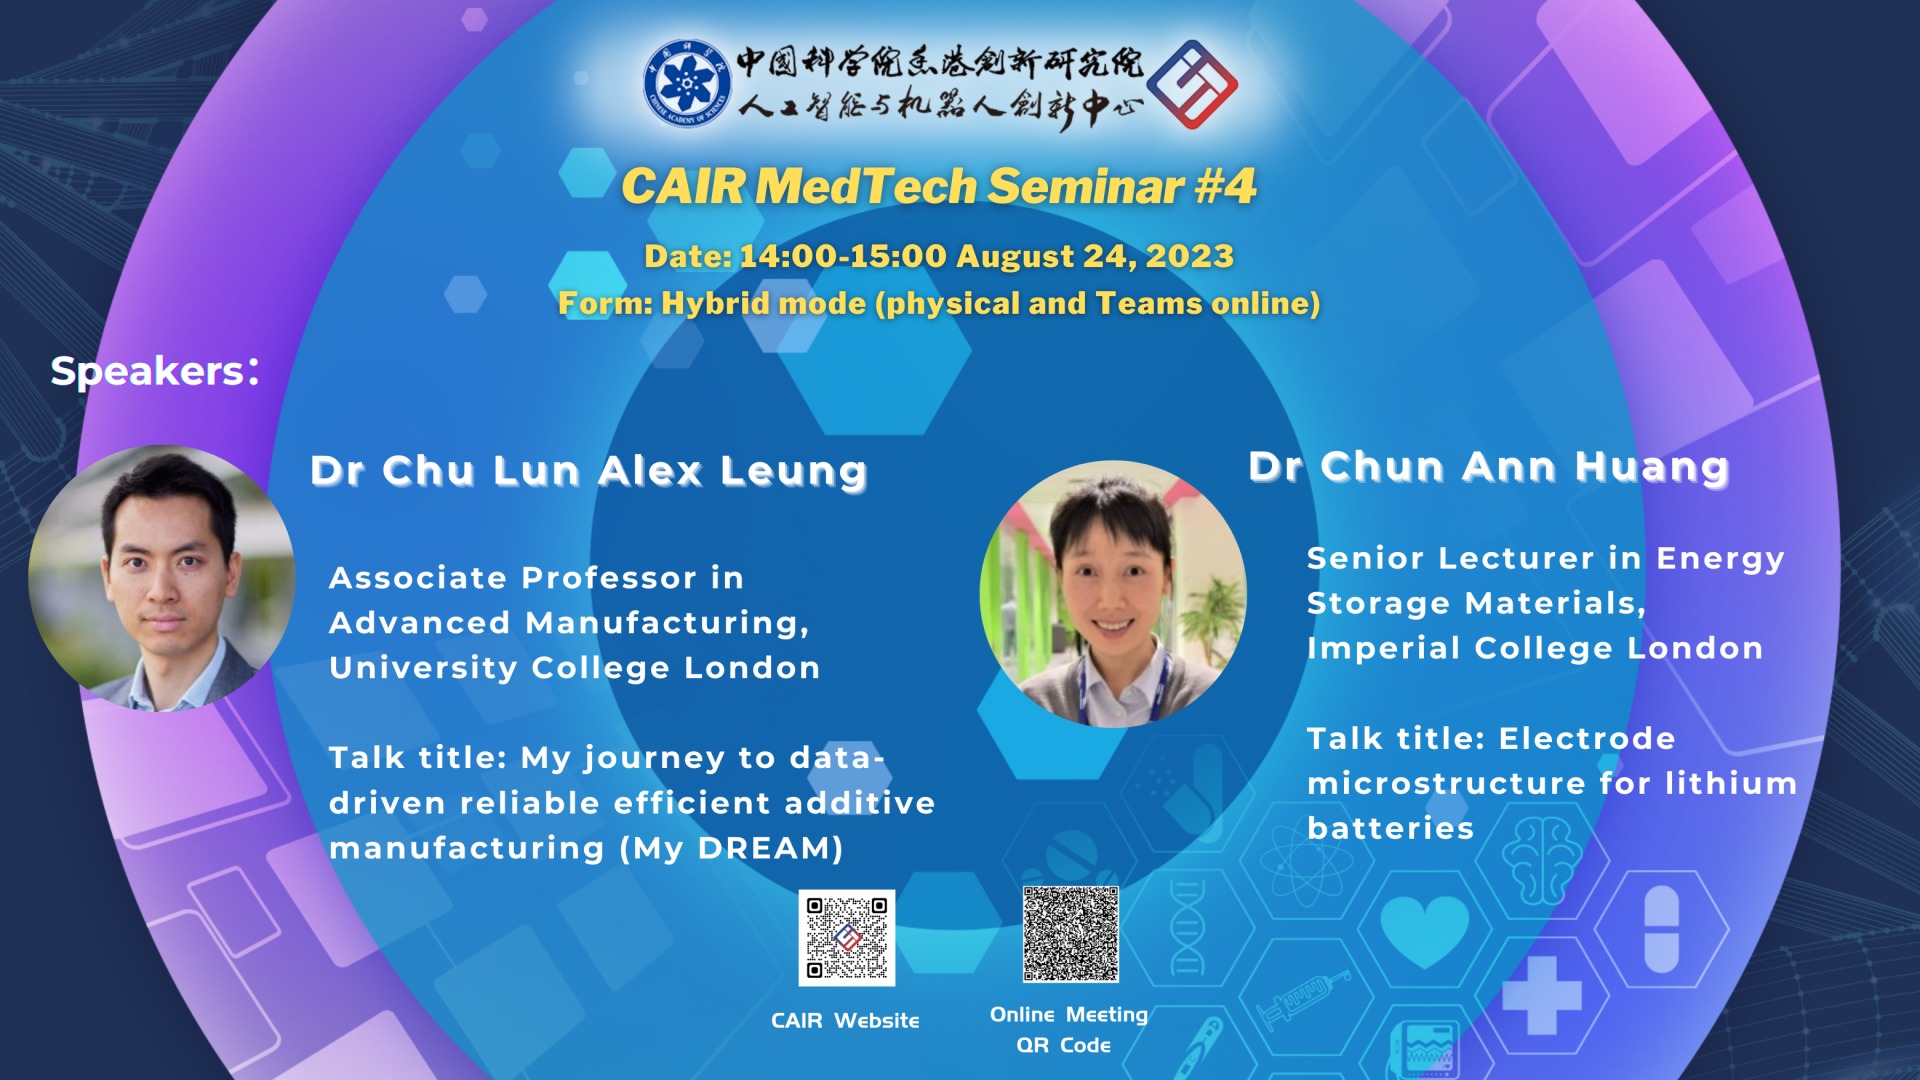 CAIR Medtech Seminar #4  My journey to data-driven reliable efficient additive manufacturing (My DREAM) & Electrode microstructure for lithium batteries 